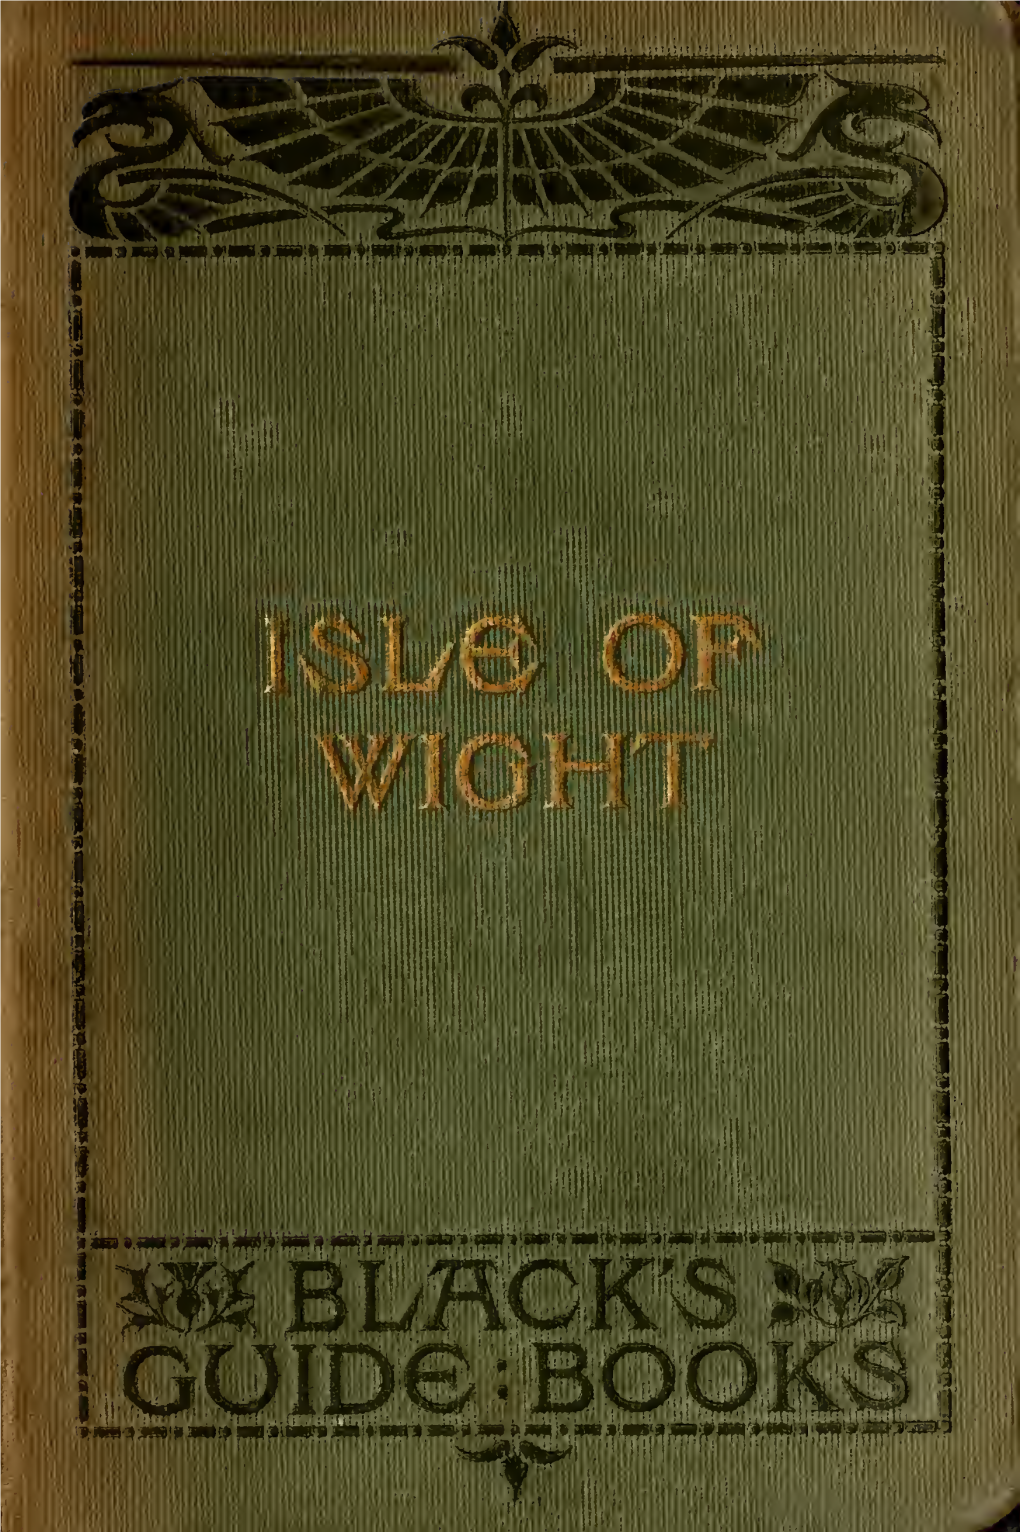 Black's Guide to the Isle of Wight